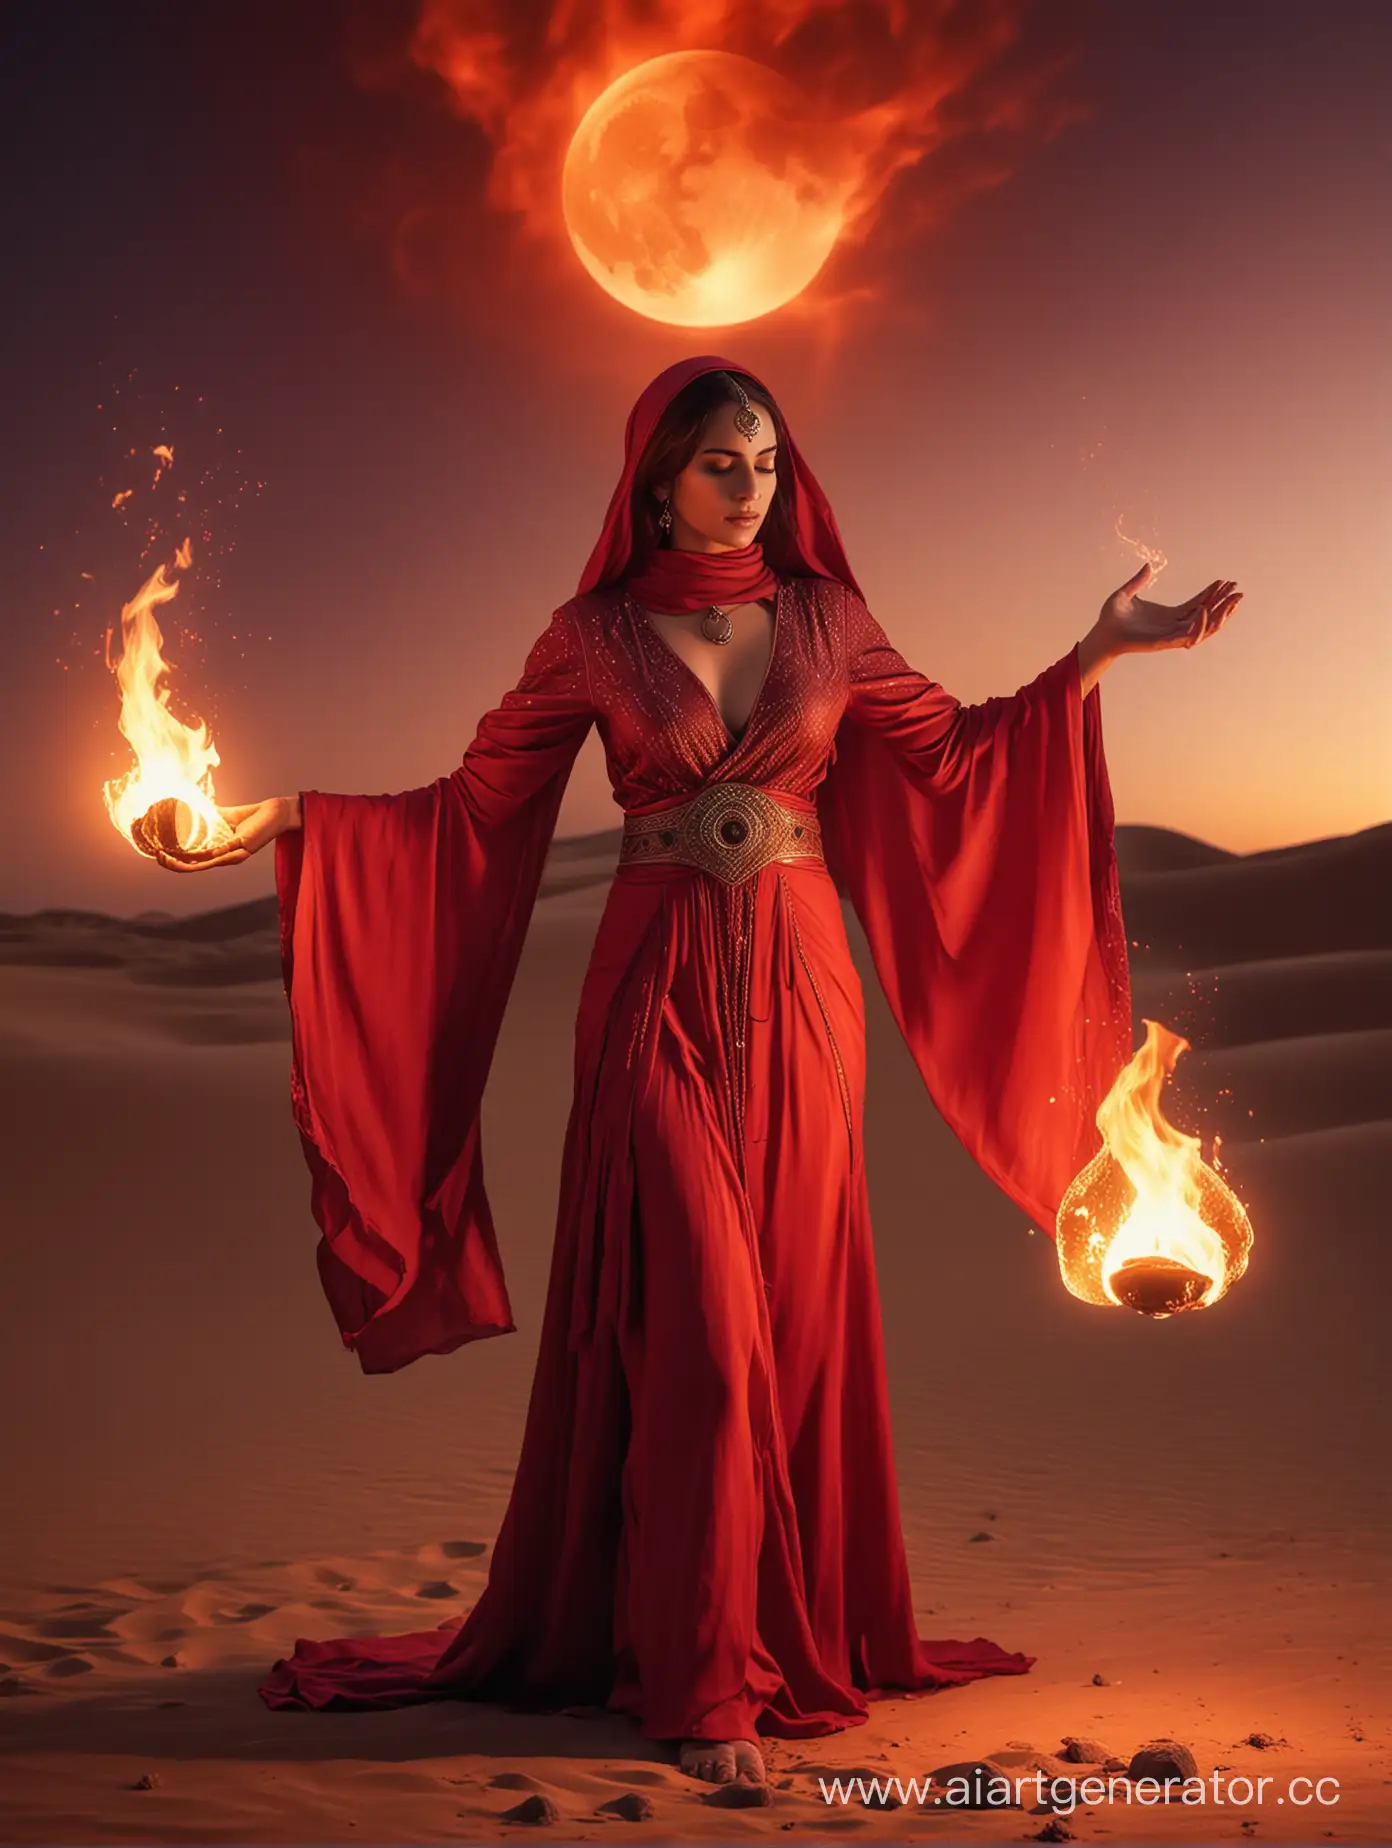 Woman in arabian crimson dress, surrounded by flames, using fire magic, desert under red moon